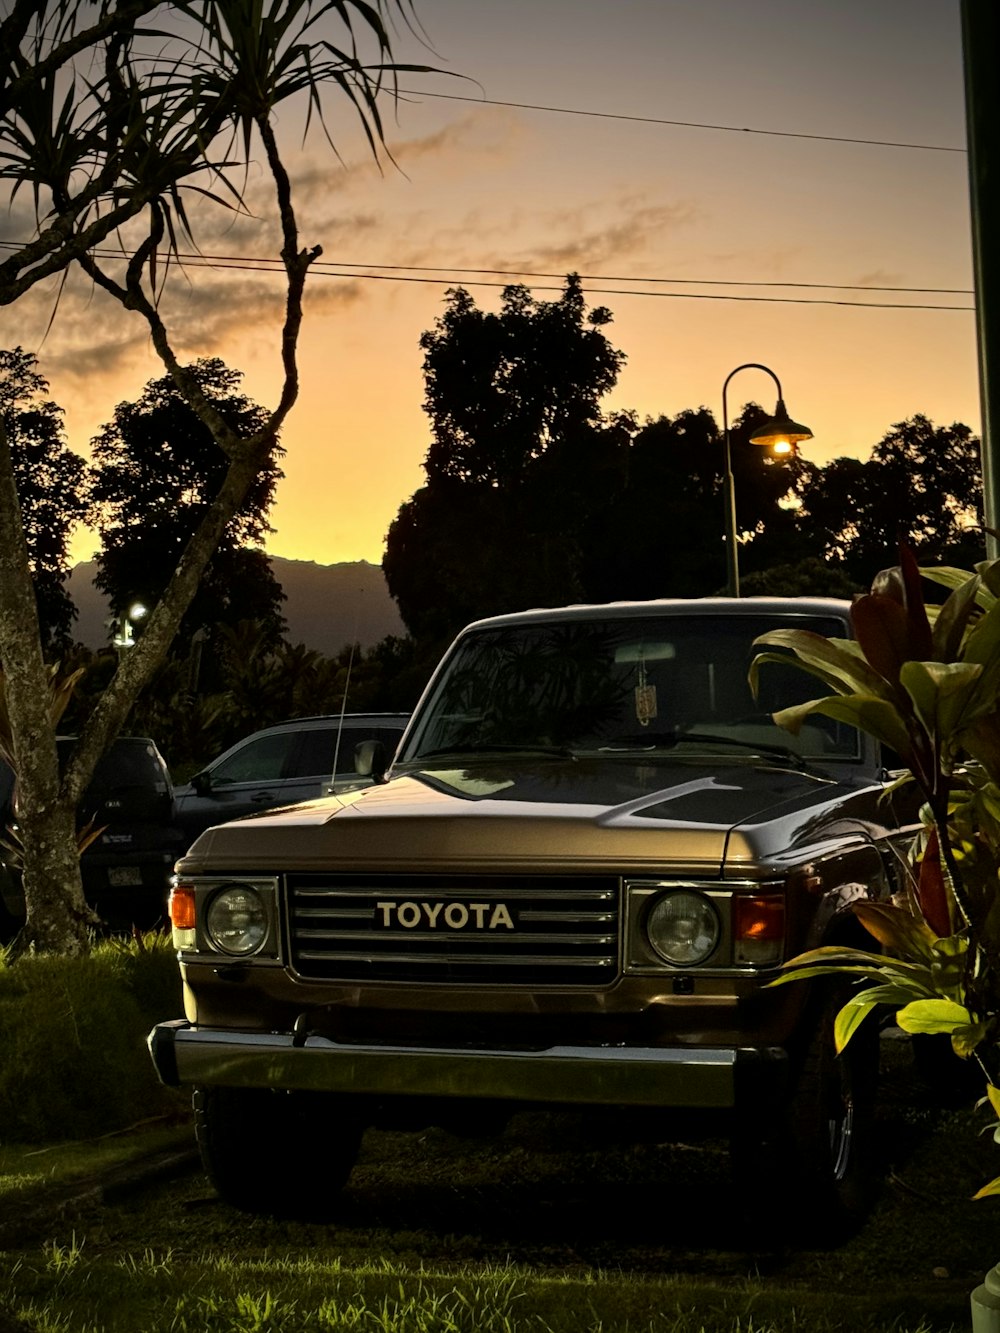 a toyota truck is parked in the grass